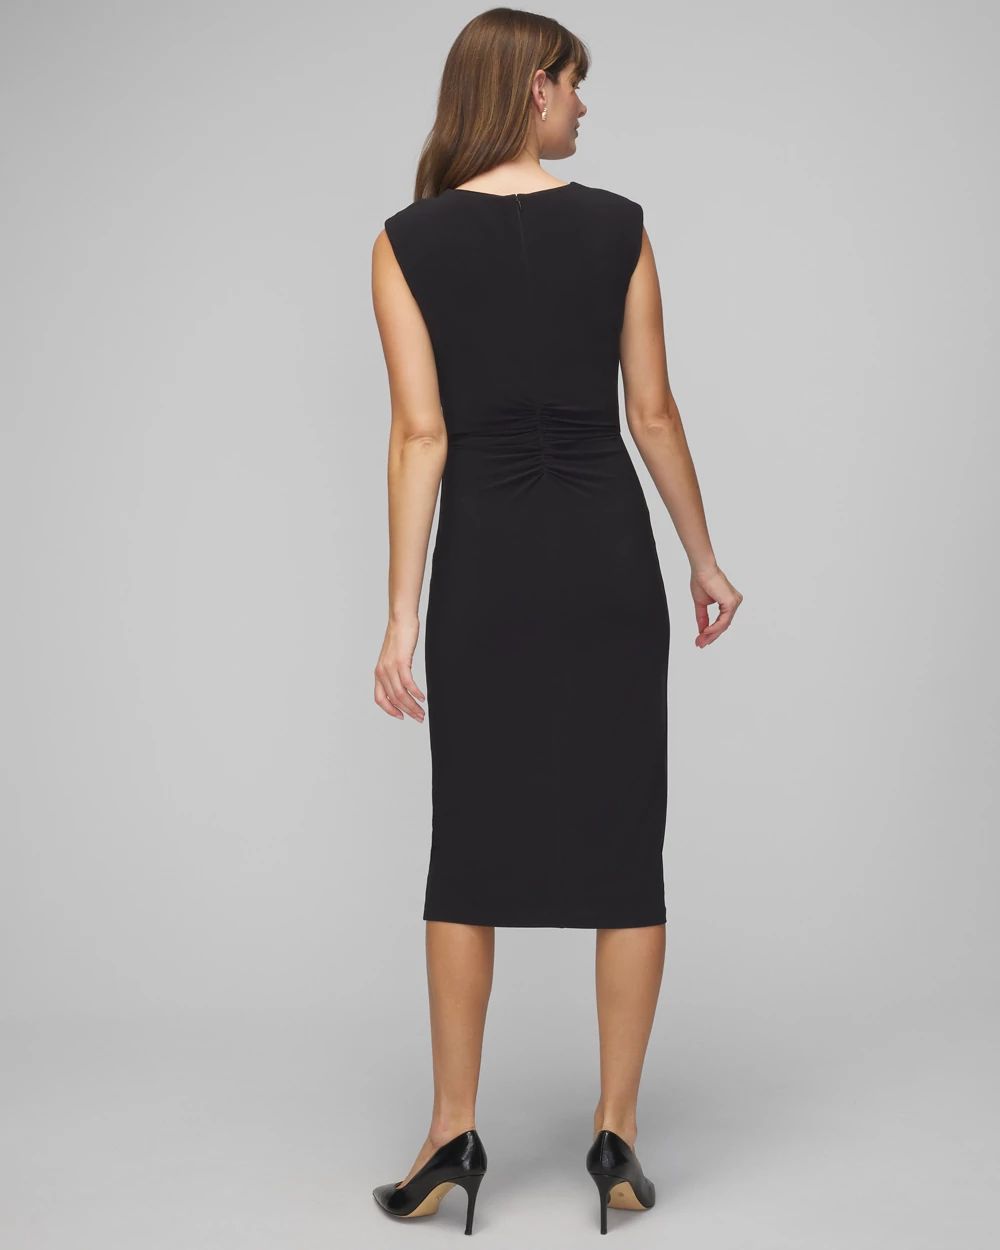 Petite Sleeveless Ruched Bodycon Midi Dress click to view larger image.